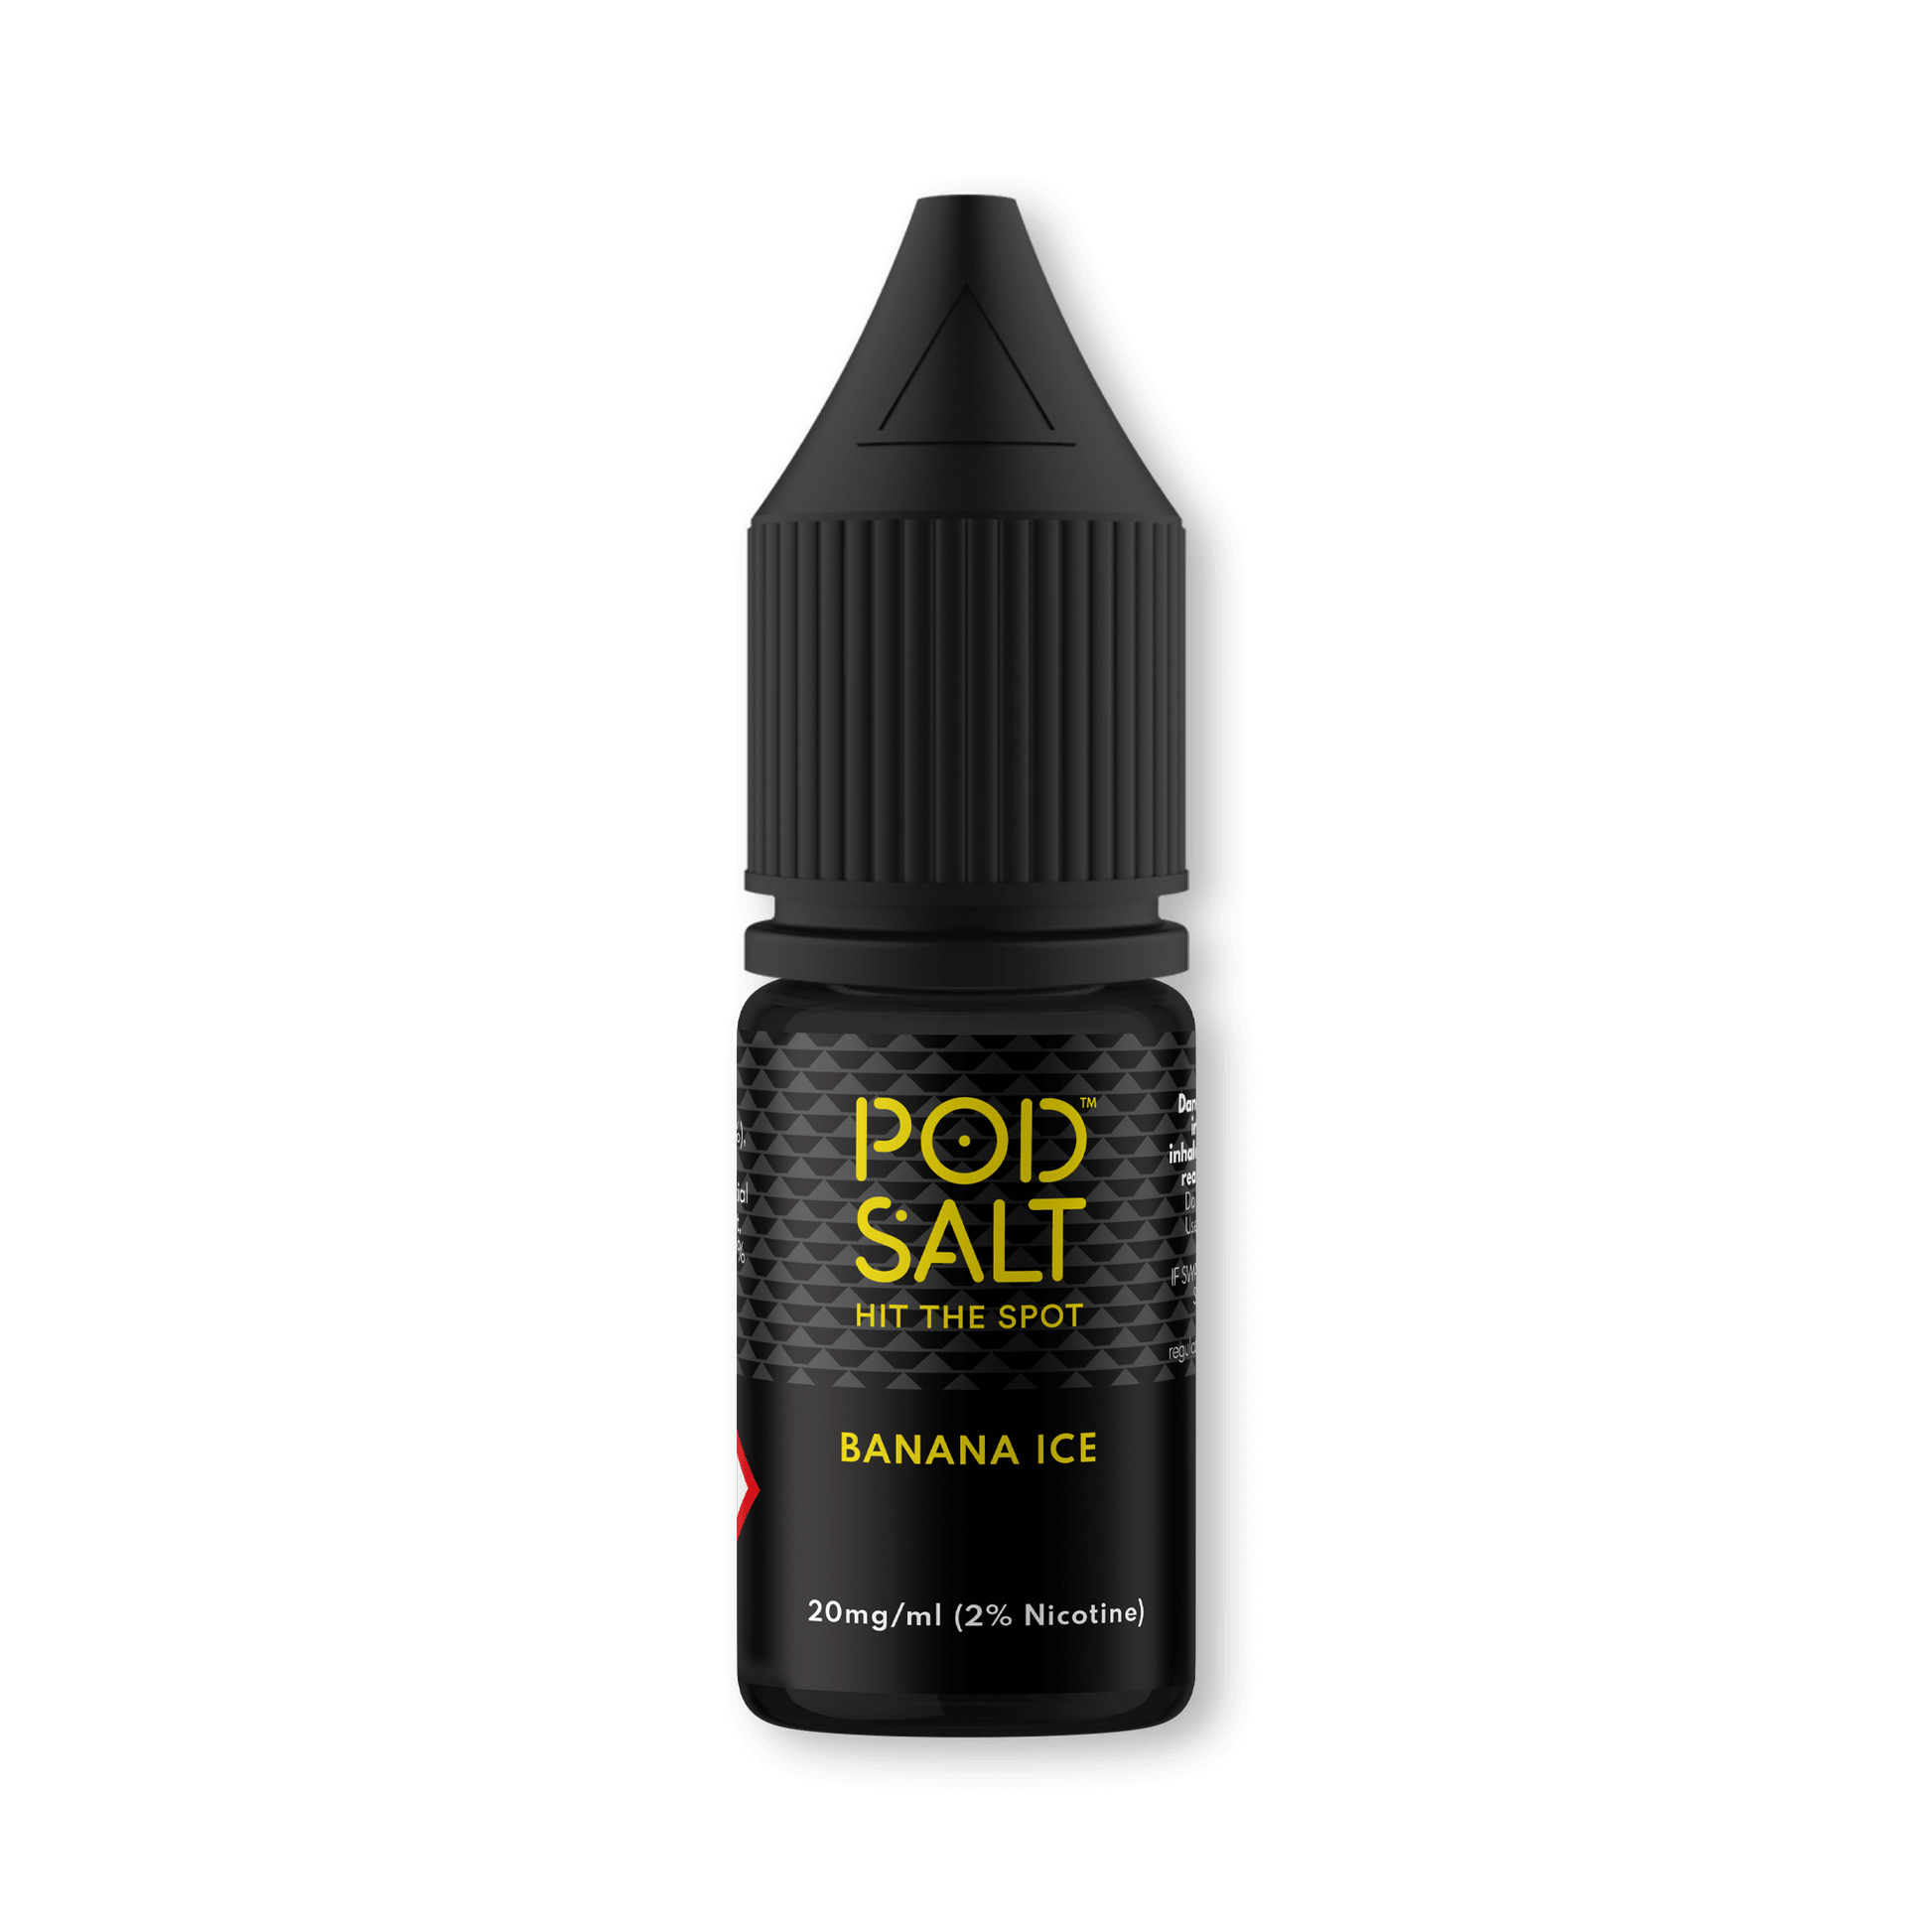 BANANA ICE - POD SALT CORE - 10ML - ICONA VAPE11MGauthentic apple flavor delightful sweetness crispness freshly picked apples orchard-fresh award-winning Nicotine Salts formula unparalleled vaping experience ICONA VAPE exclusive Shop now Flavour profile: Apple 10ml bottle size 50VG/50PG ratio Made in the UK TPD Compliant